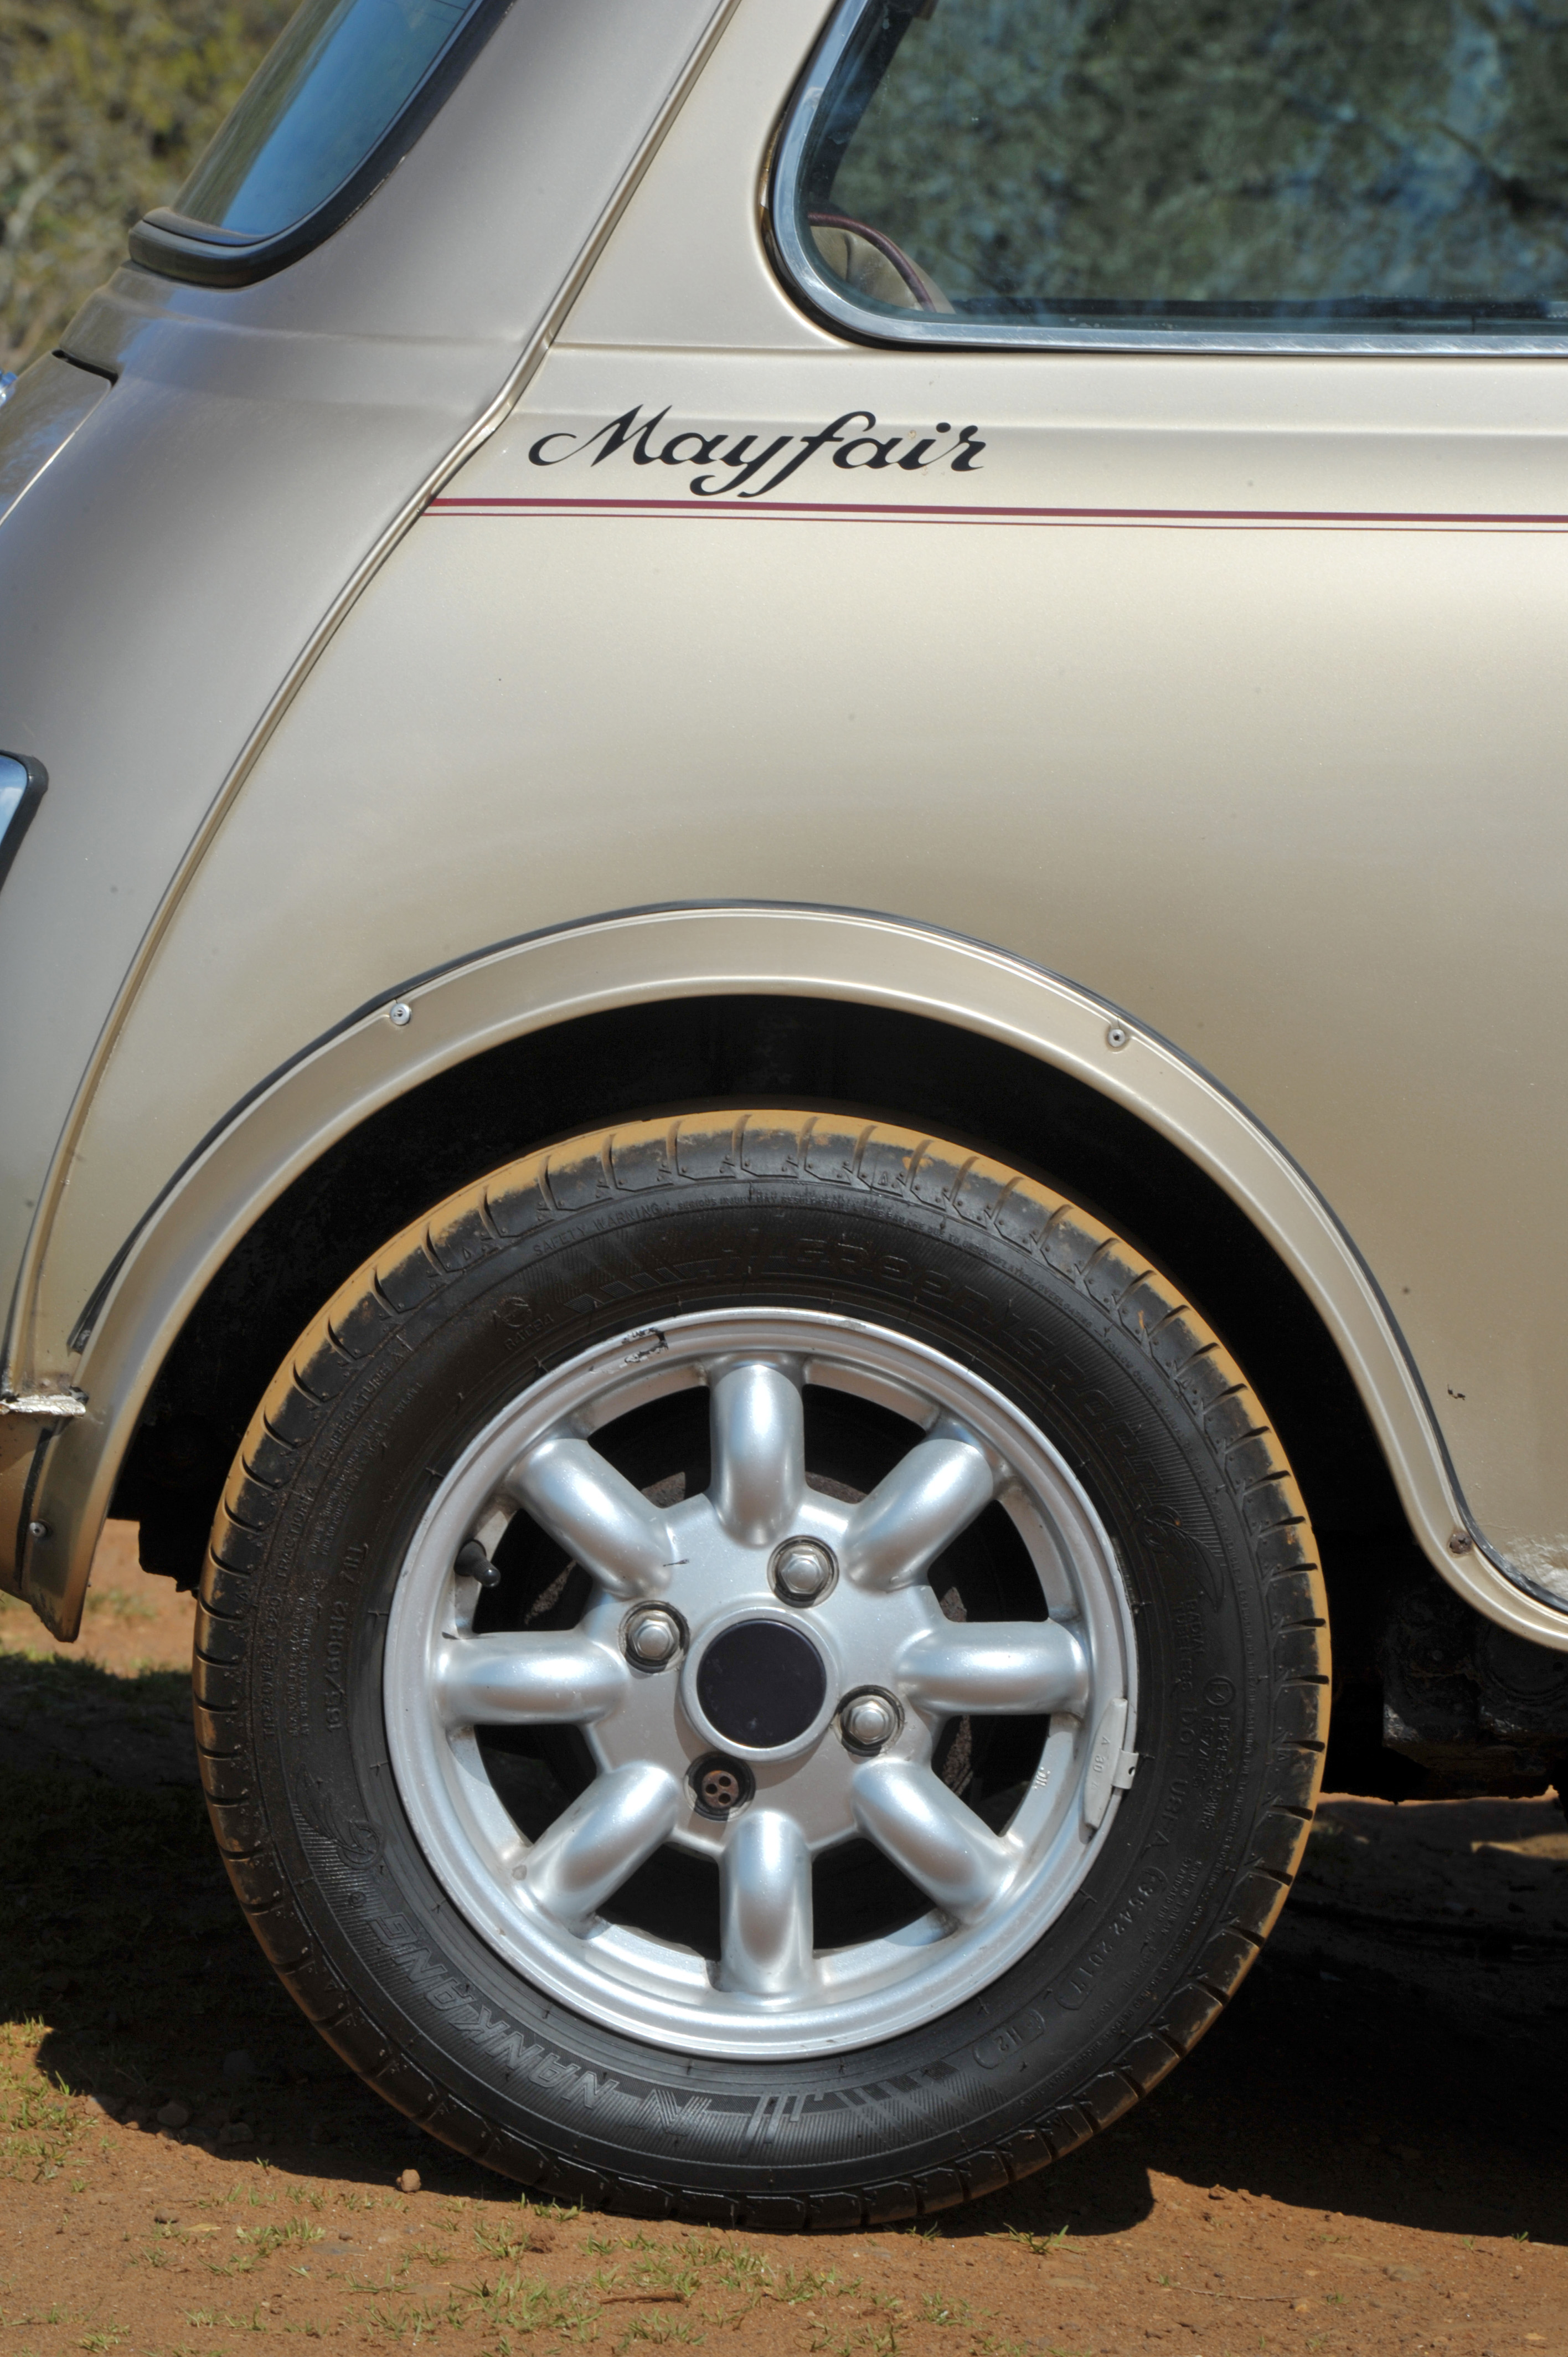 1987 Mini Mayfair. Registration number D776 XBL. Finished in Metallic Gold with contrasting cream le - Image 17 of 26